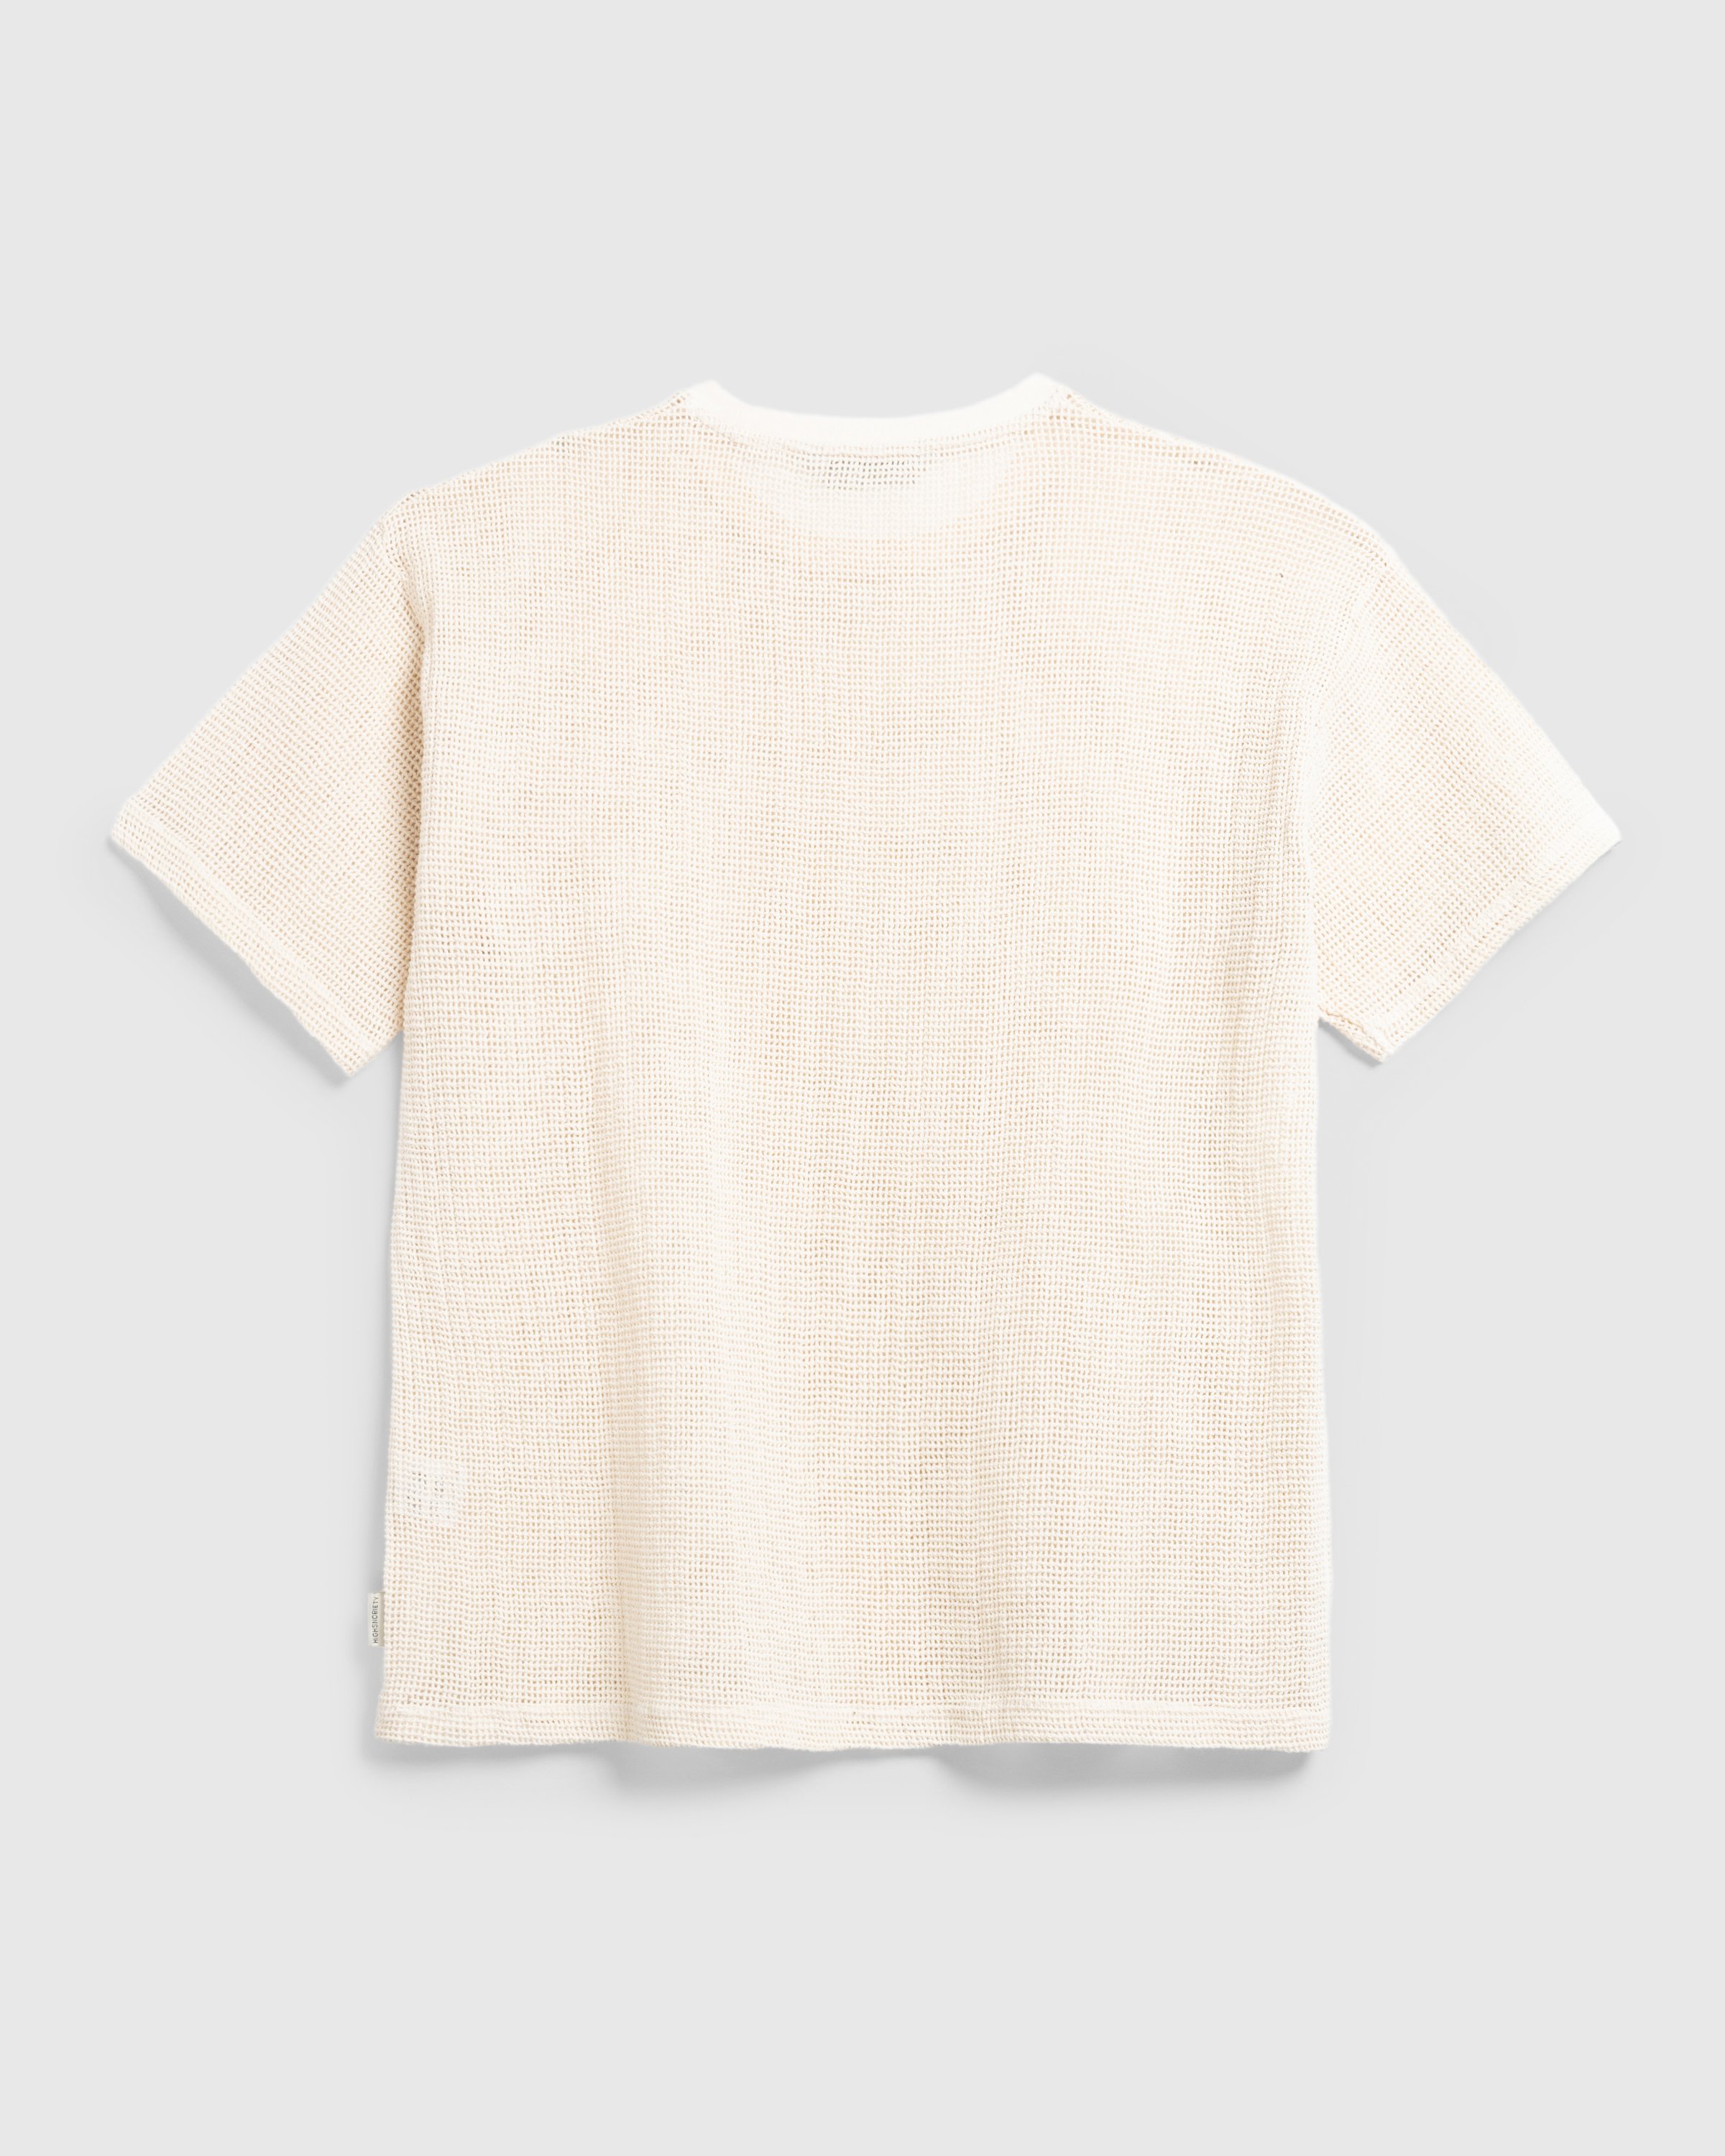 Highsnobiety HS05 - Pigment Dyed Cotton Mesh Knit Natural - Clothing -  - Image 2